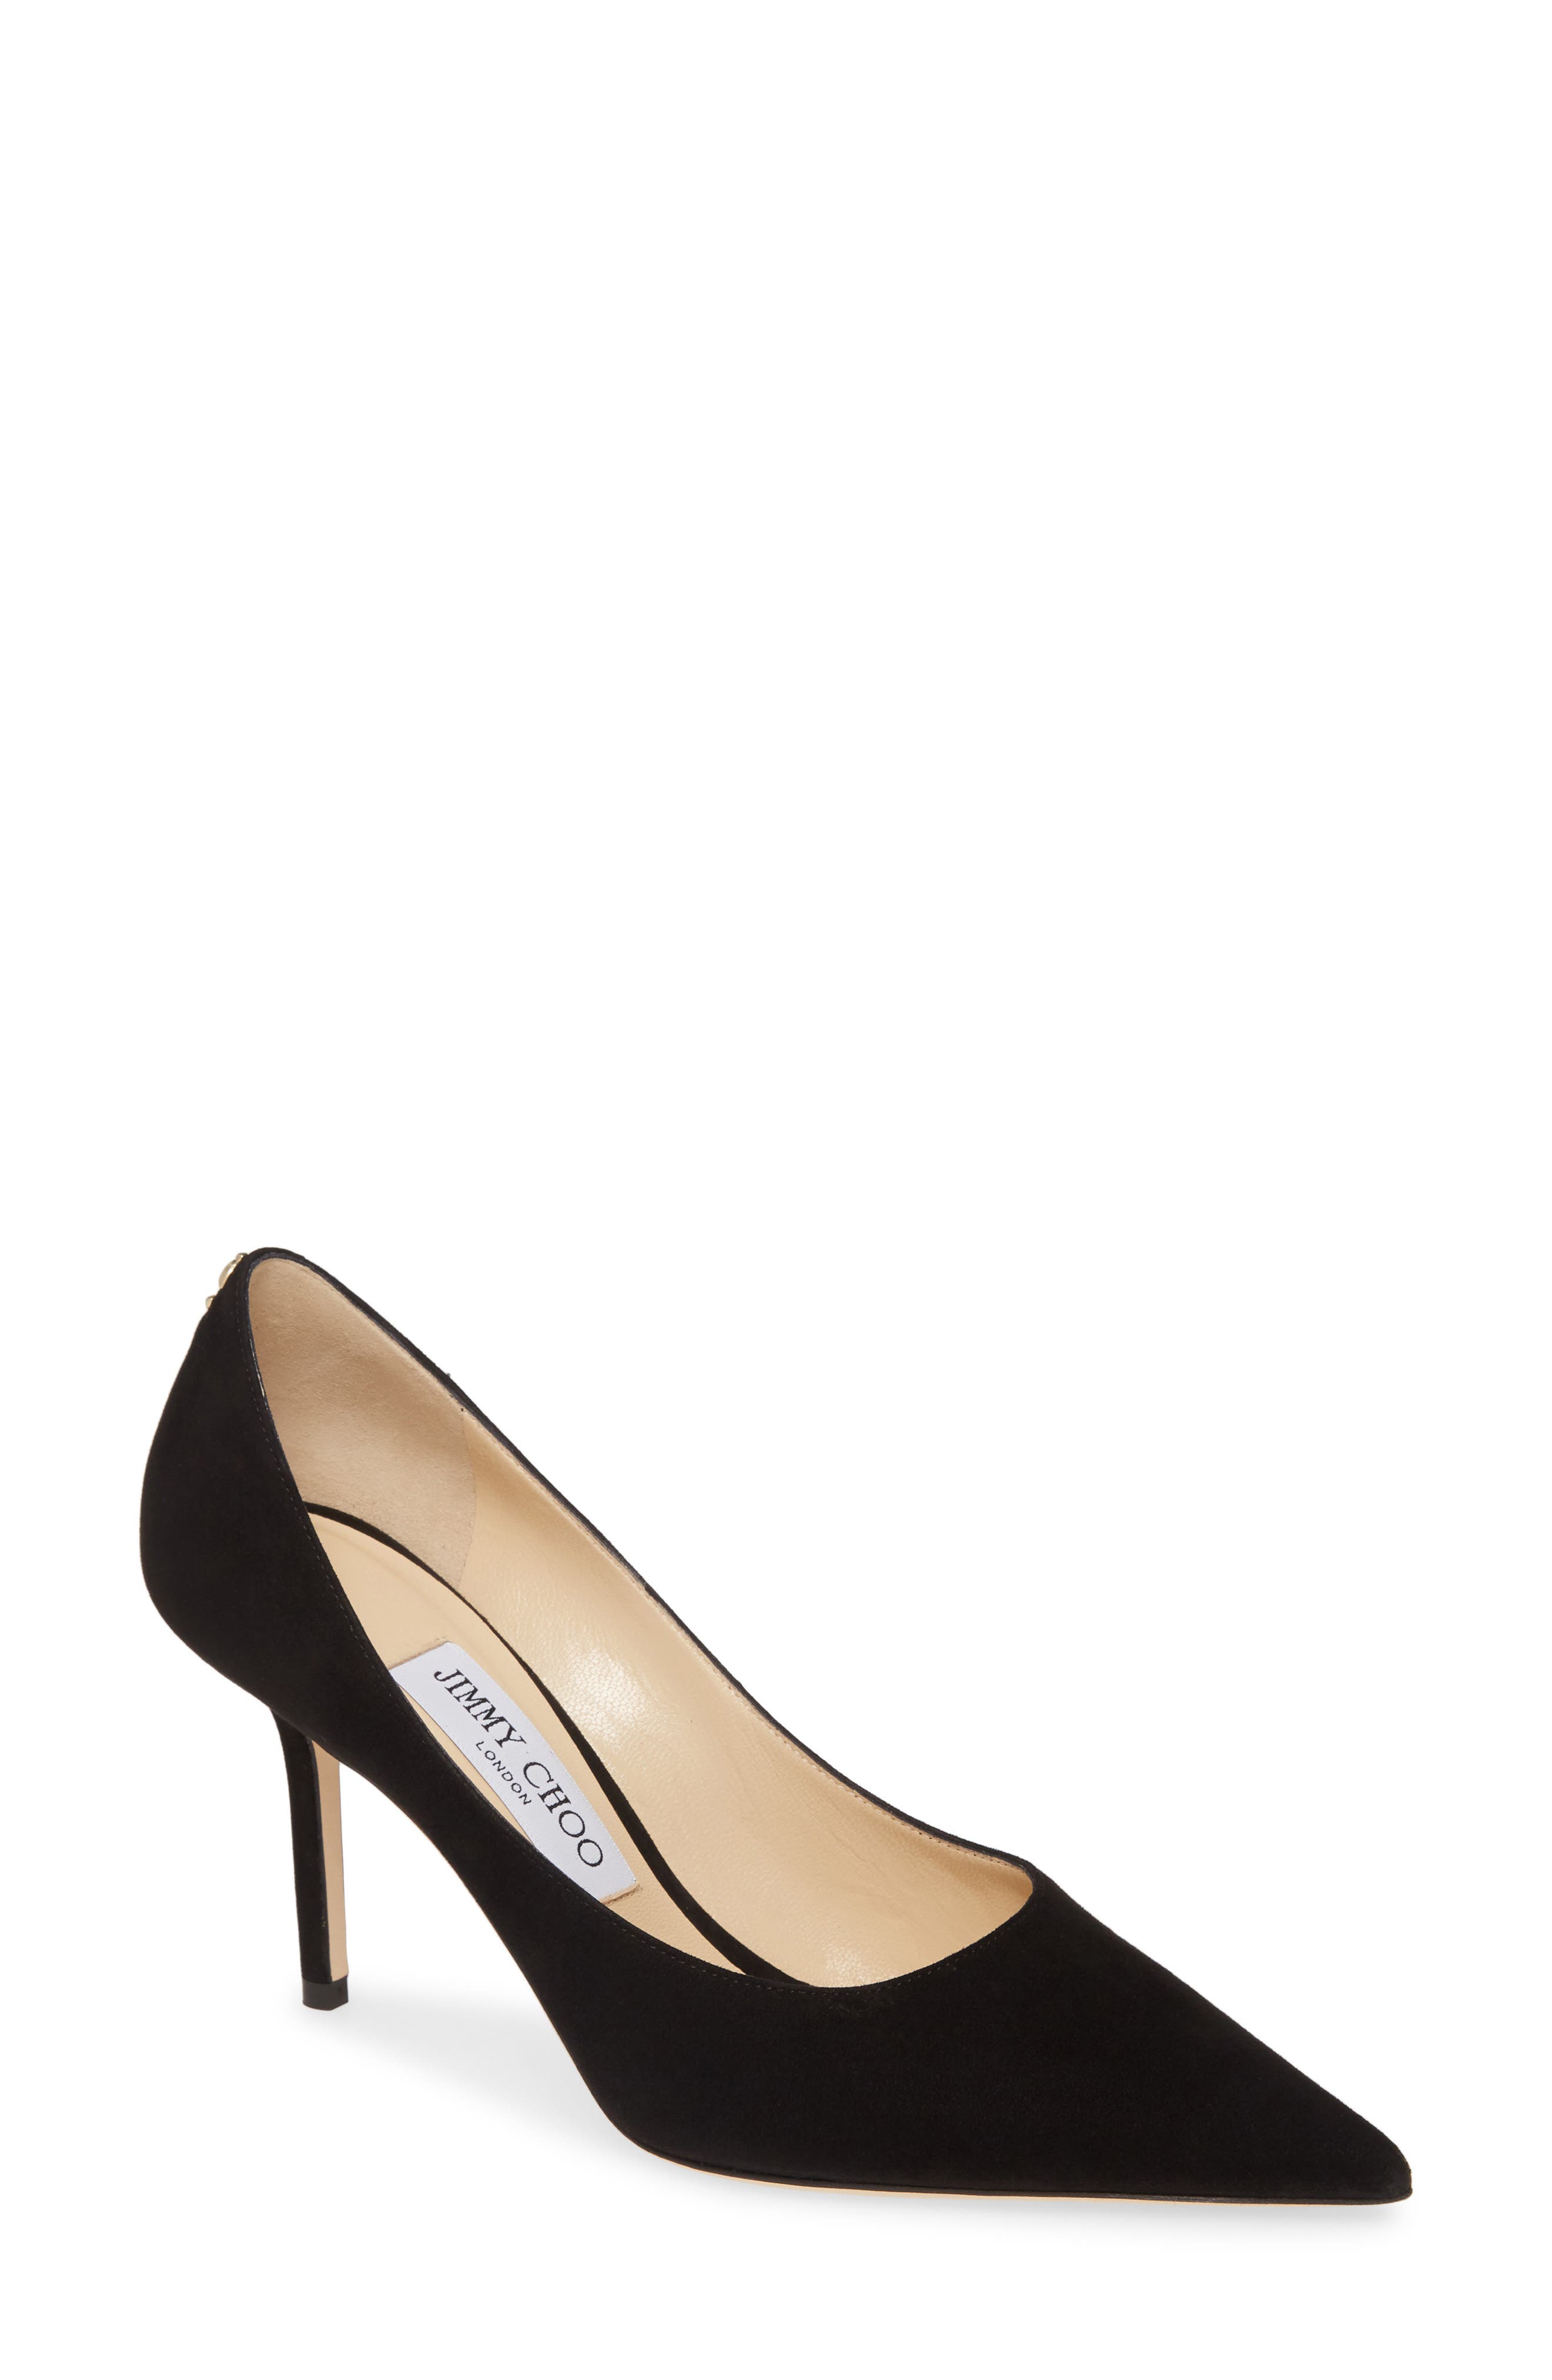 nordstrom jimmy choo shoes